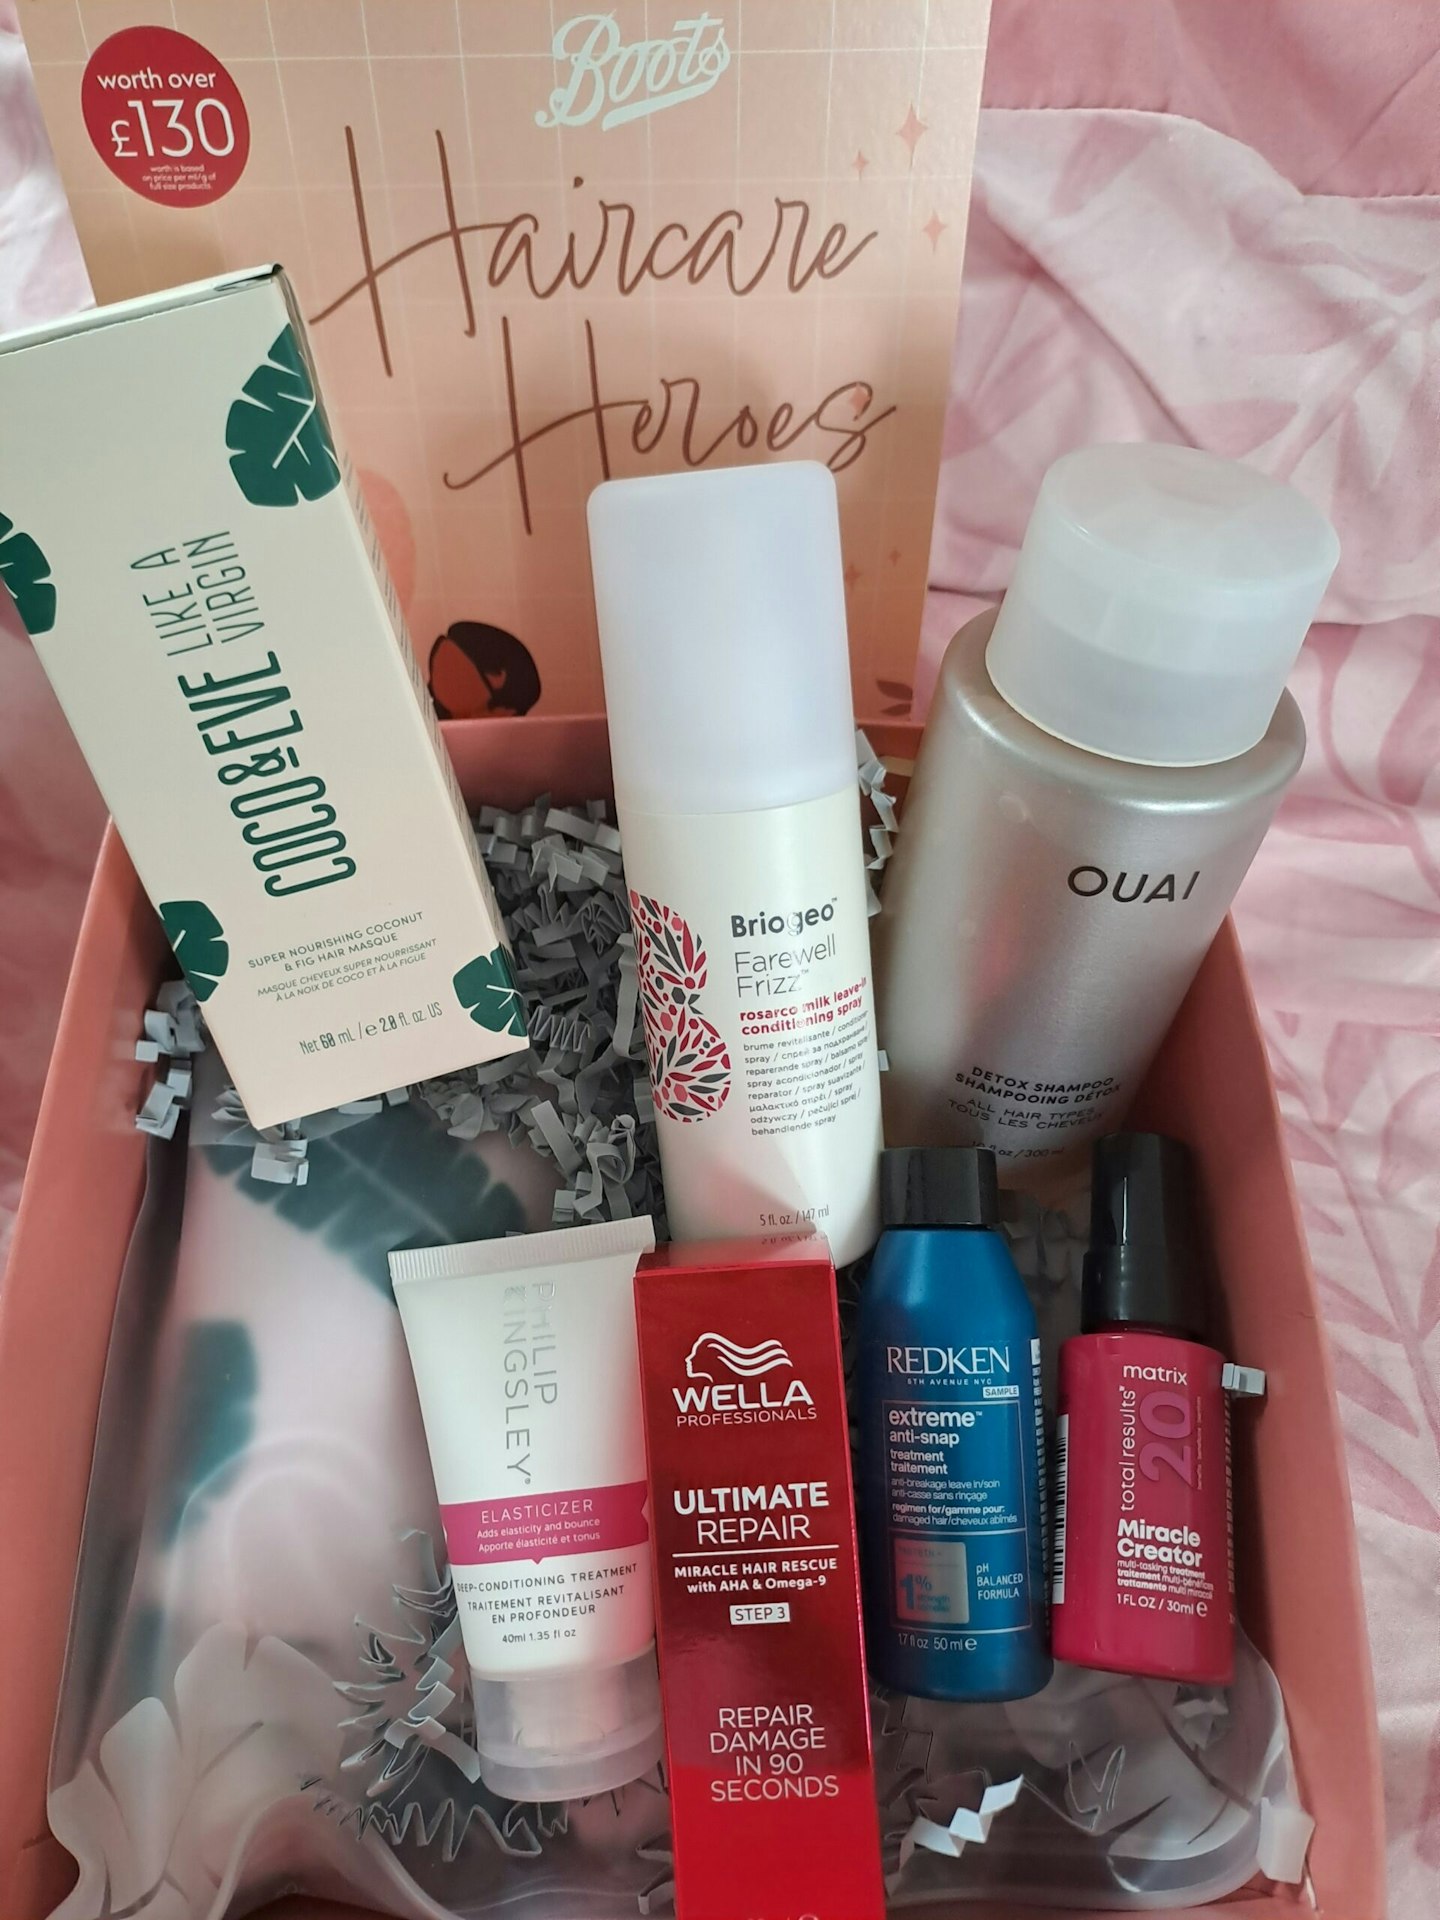 Boots Premium Salon Haircare Heroes Box with products